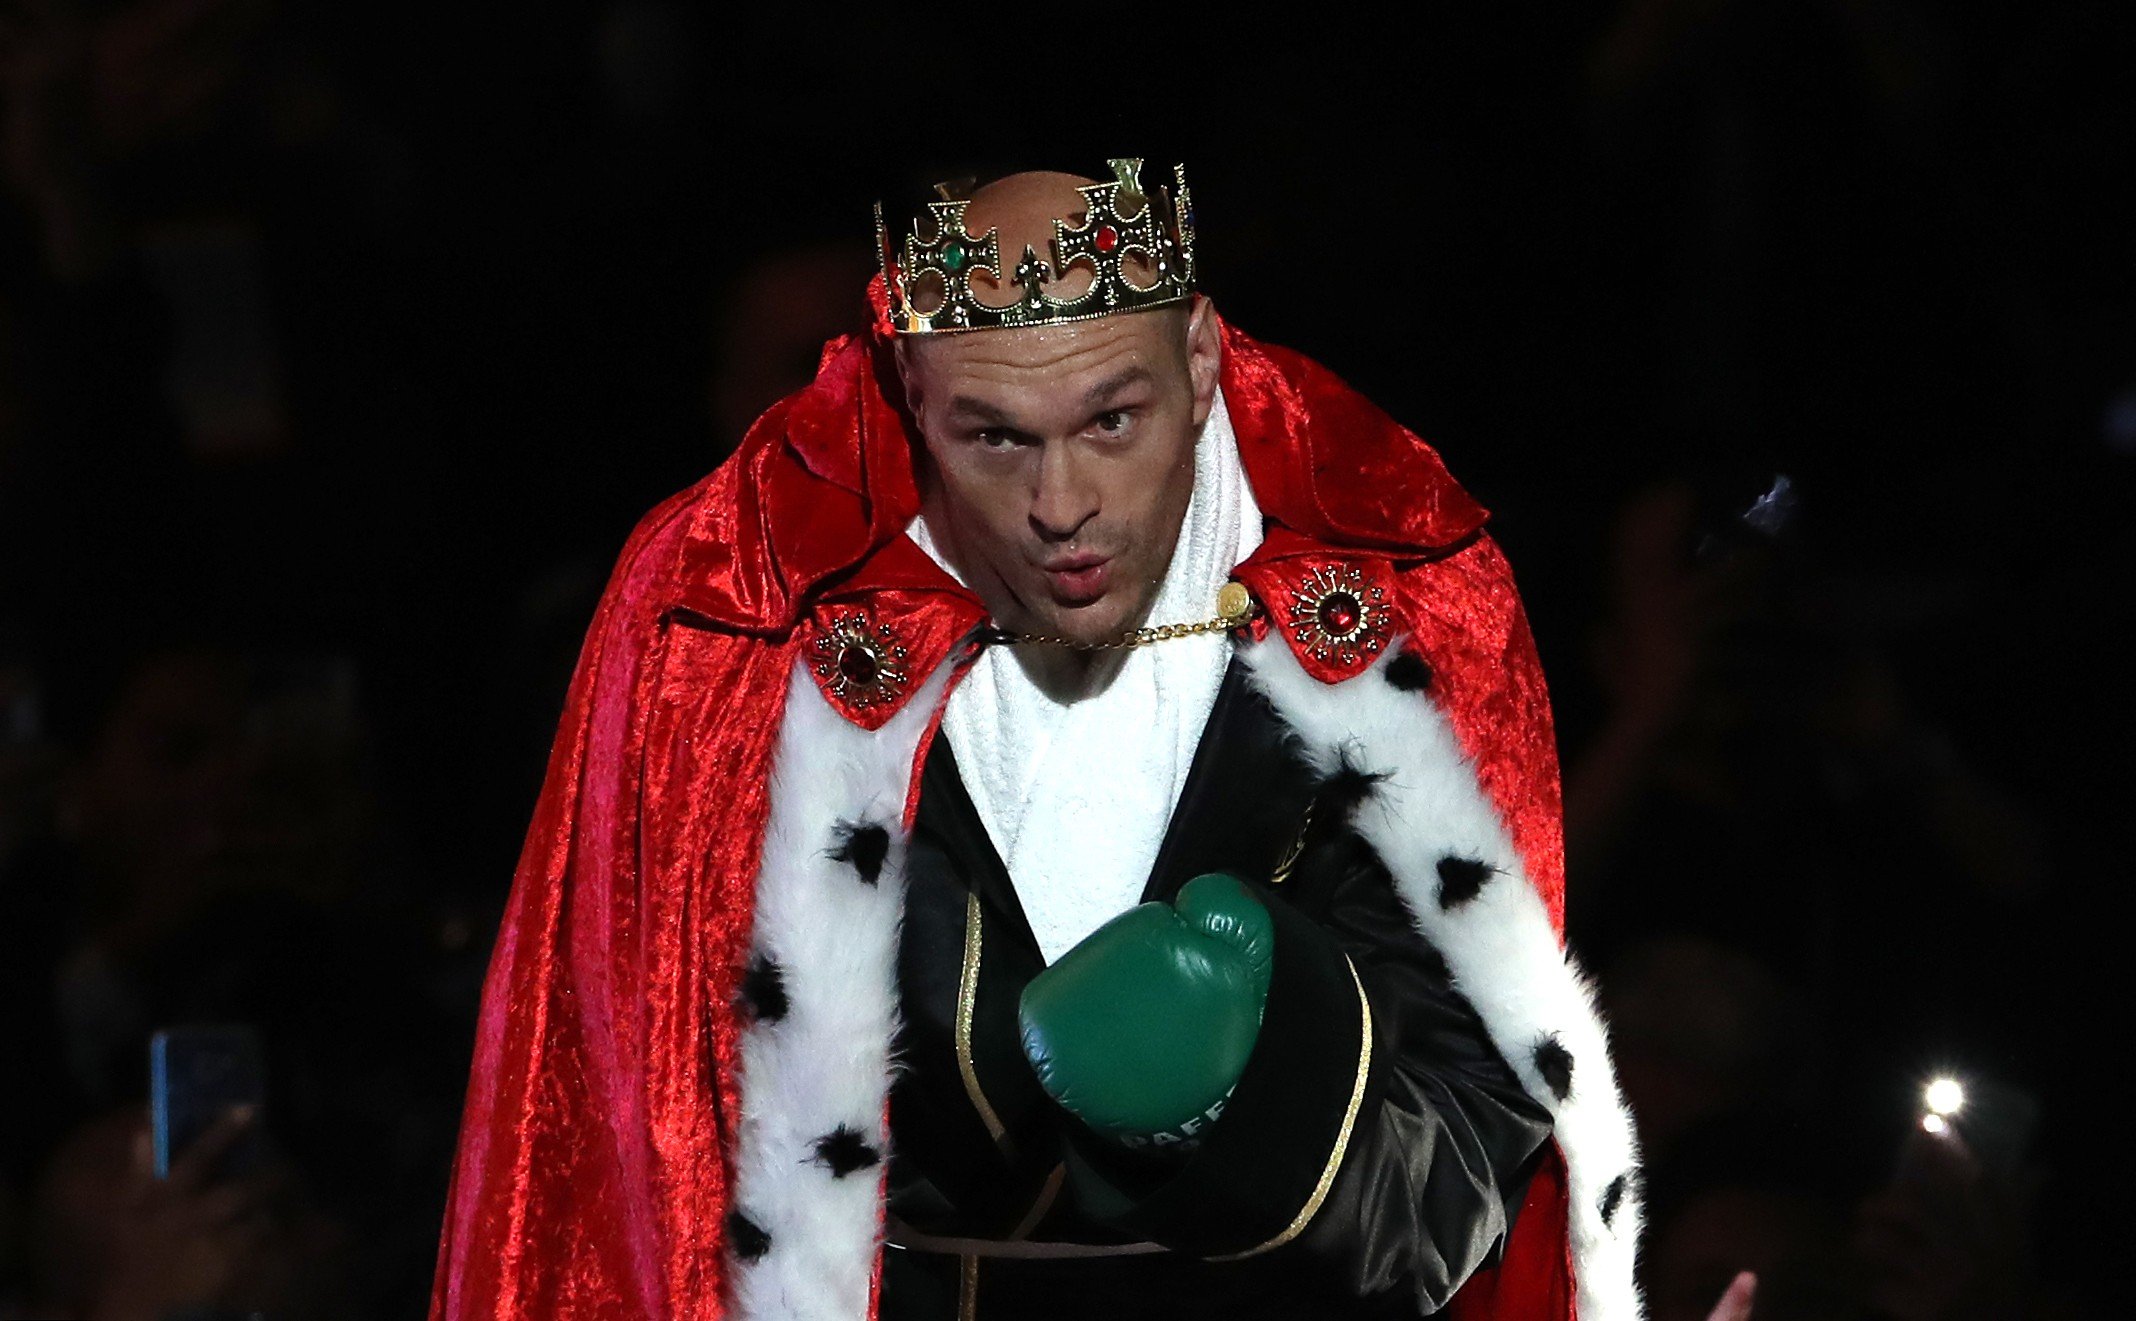 Tyson Fury makes his way to the ring ahead of his heavyweight title clash against Deontay Wilder. Photo: DPA